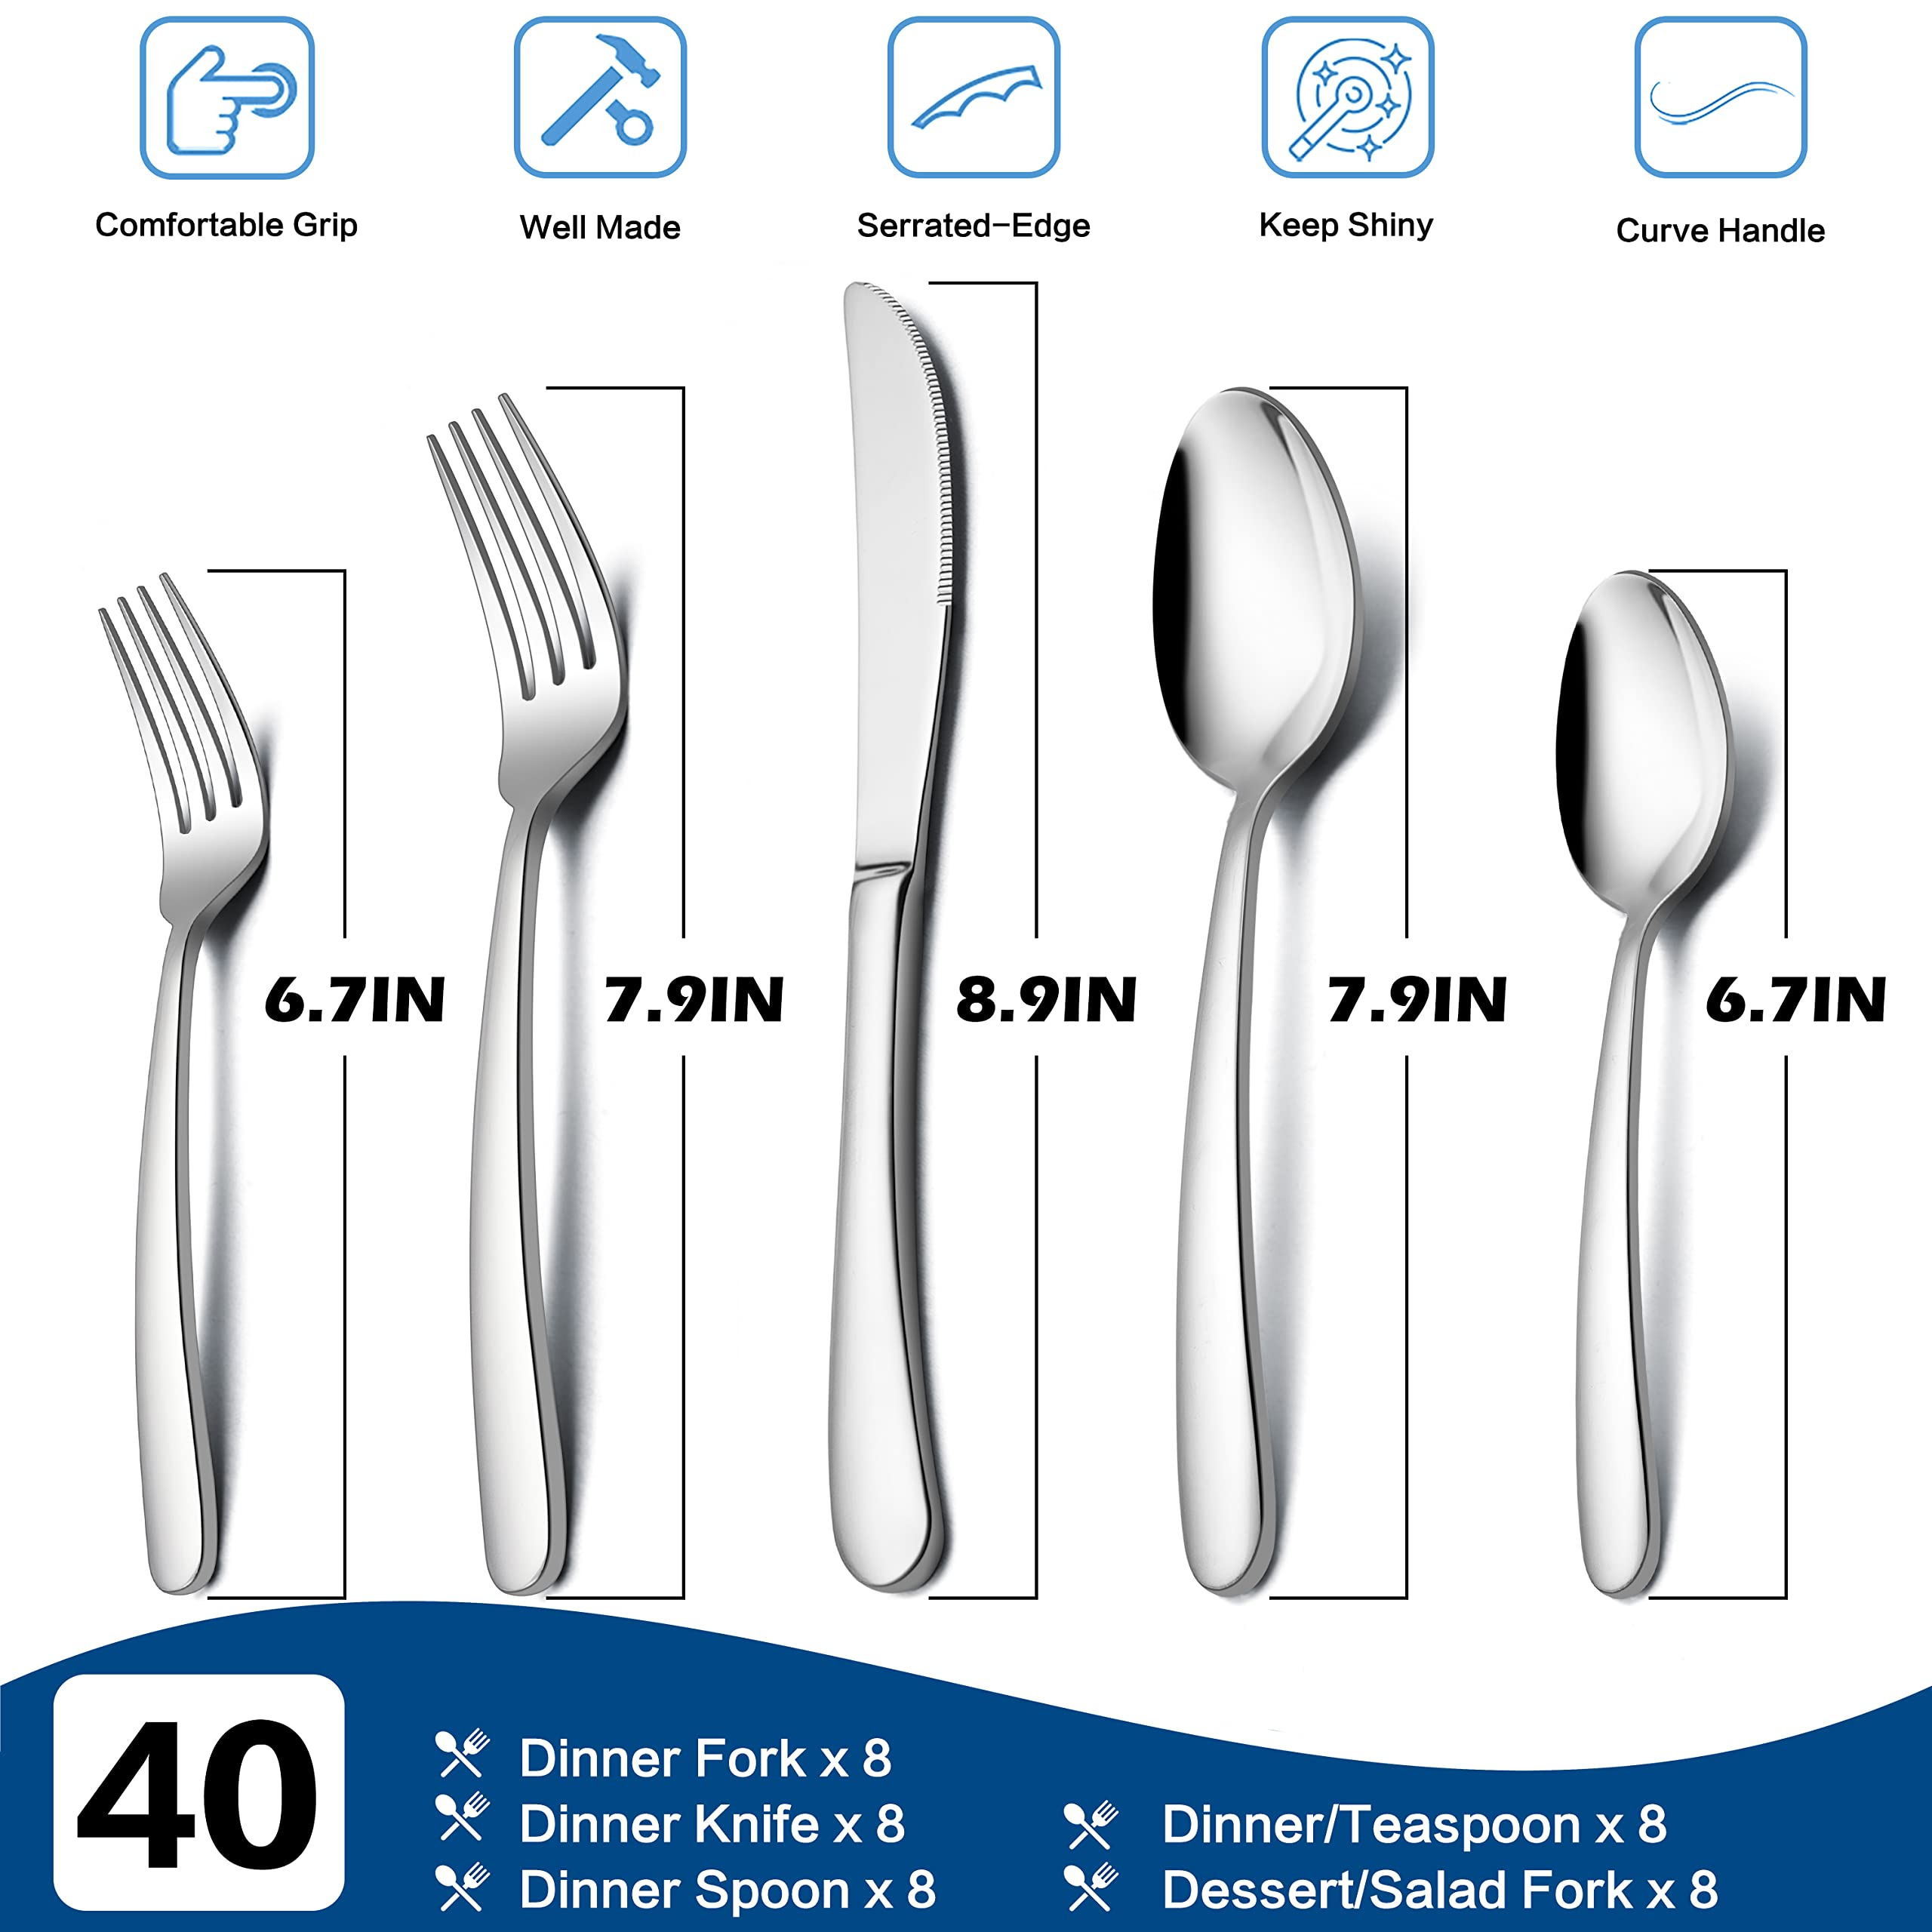 E-far Heavy Duty Silverware Set for 8, 40-Piece Stainless Steel Flatware Cutlery Set, Heavy Weight Metal Eating Utensils Sets for Home Restaurant Weddings, Mirror Polished & Dishwasher Safe